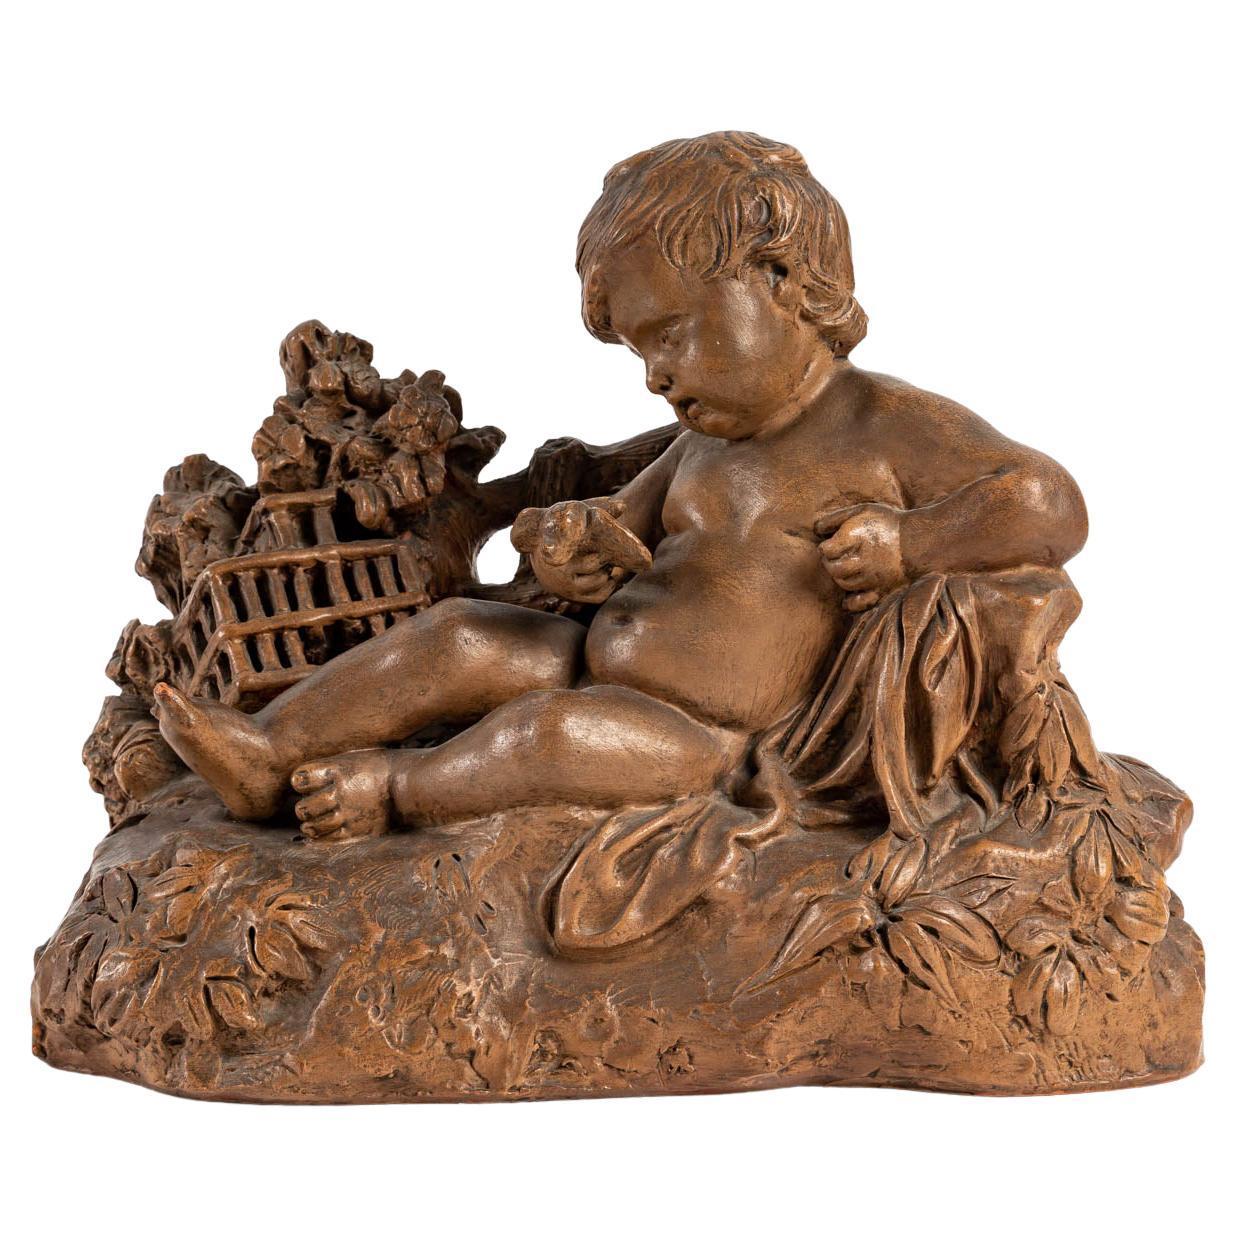 Terracotta representing a child and a bird in the hand, signed, early 20th century, Louis XV style.
Measures: H: 24 cm, W: 32 cm, D: 15 cm.